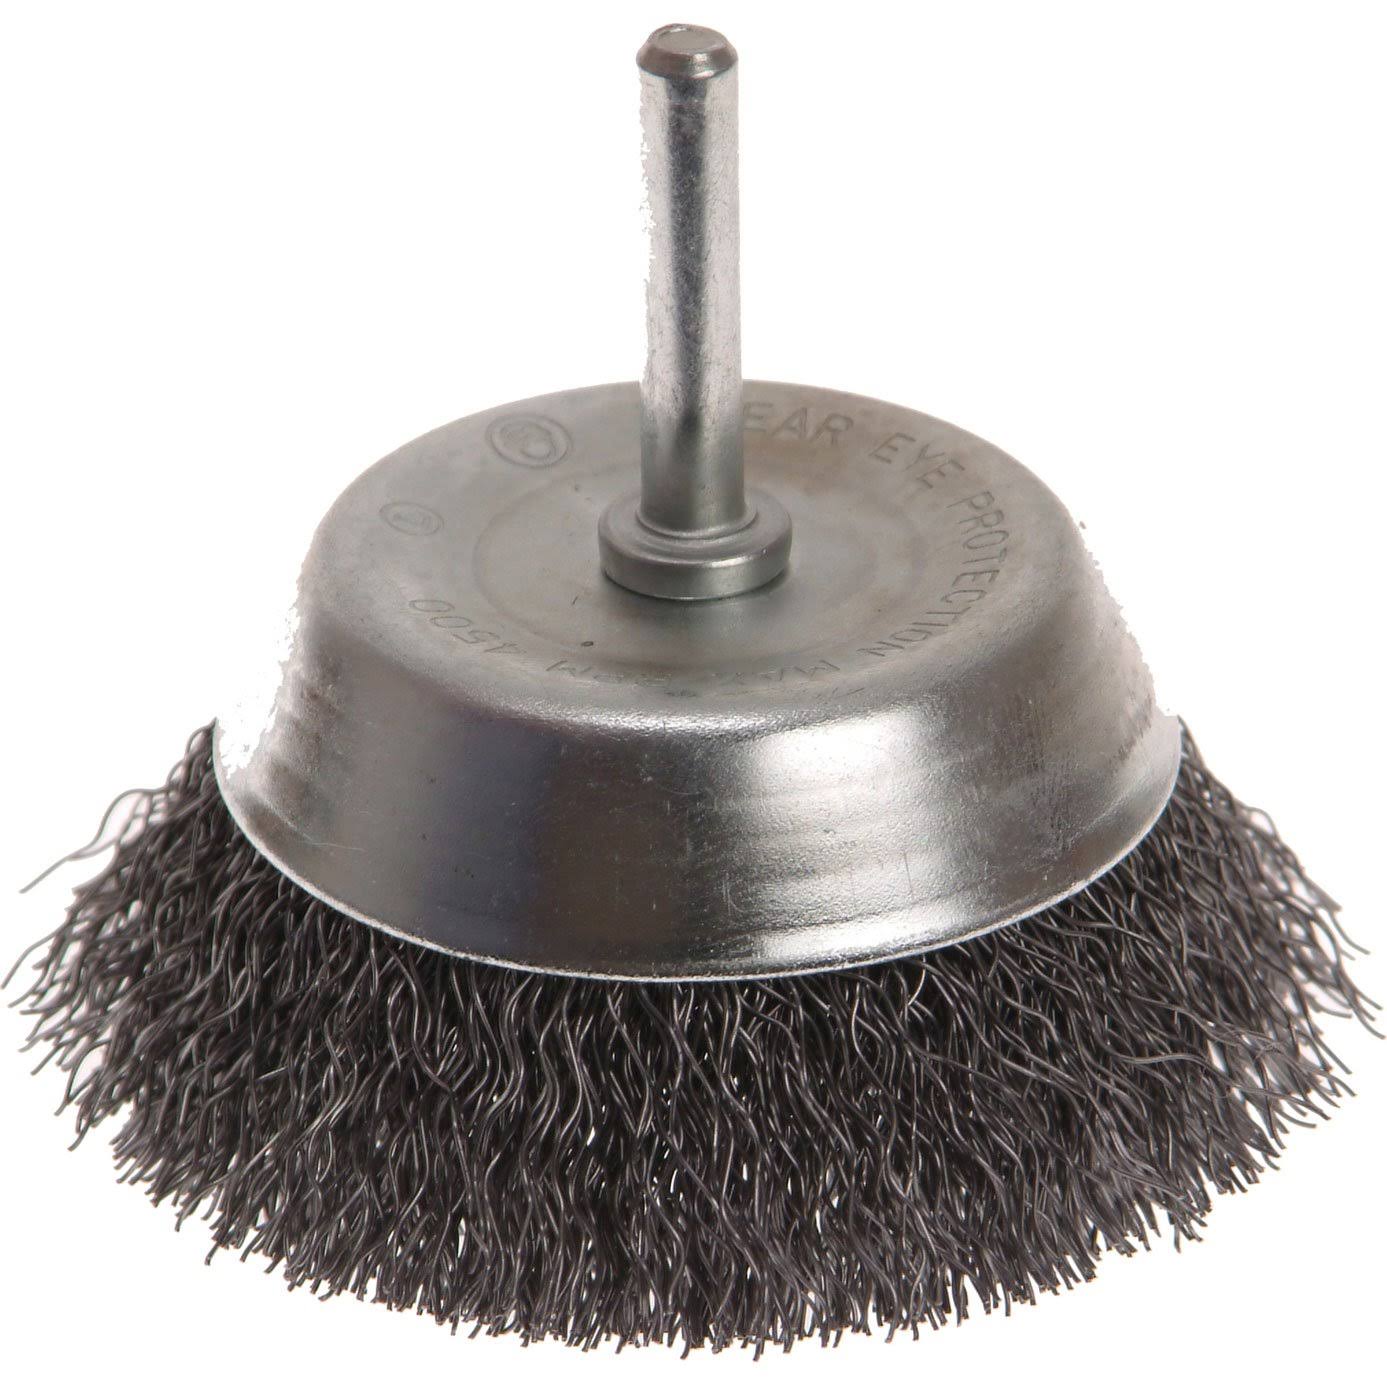 Faithfull Wire Cup Brush - 75 x 6mm Shank, 0.30mm